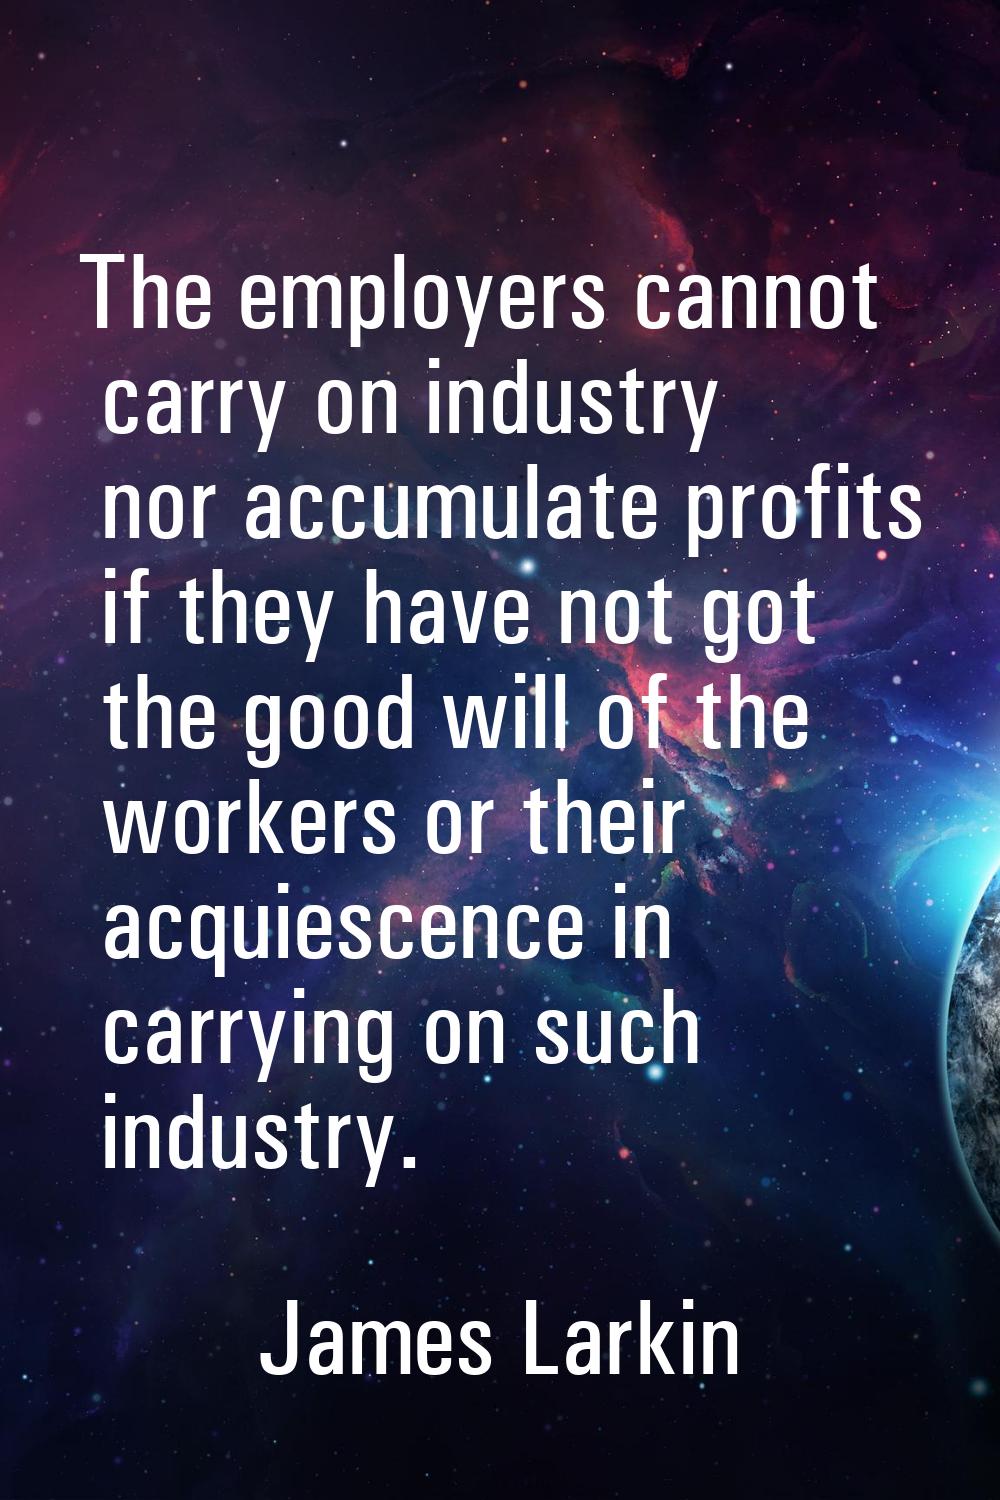 The employers cannot carry on industry nor accumulate profits if they have not got the good will of